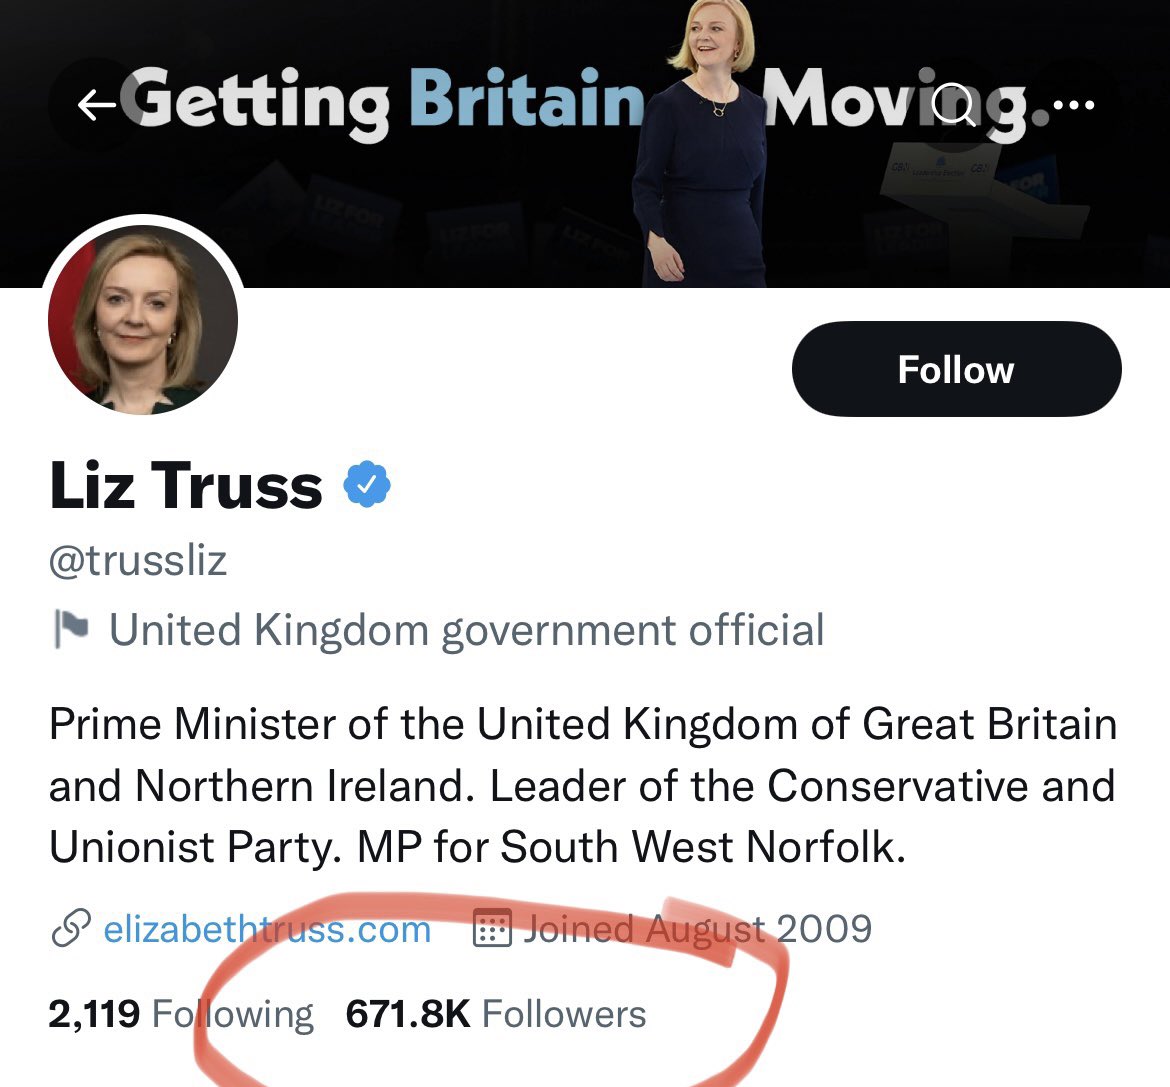 Official cat 🐱 of the #UK government has more #Twitter followers than the UK’s Prime Minister @trussliz